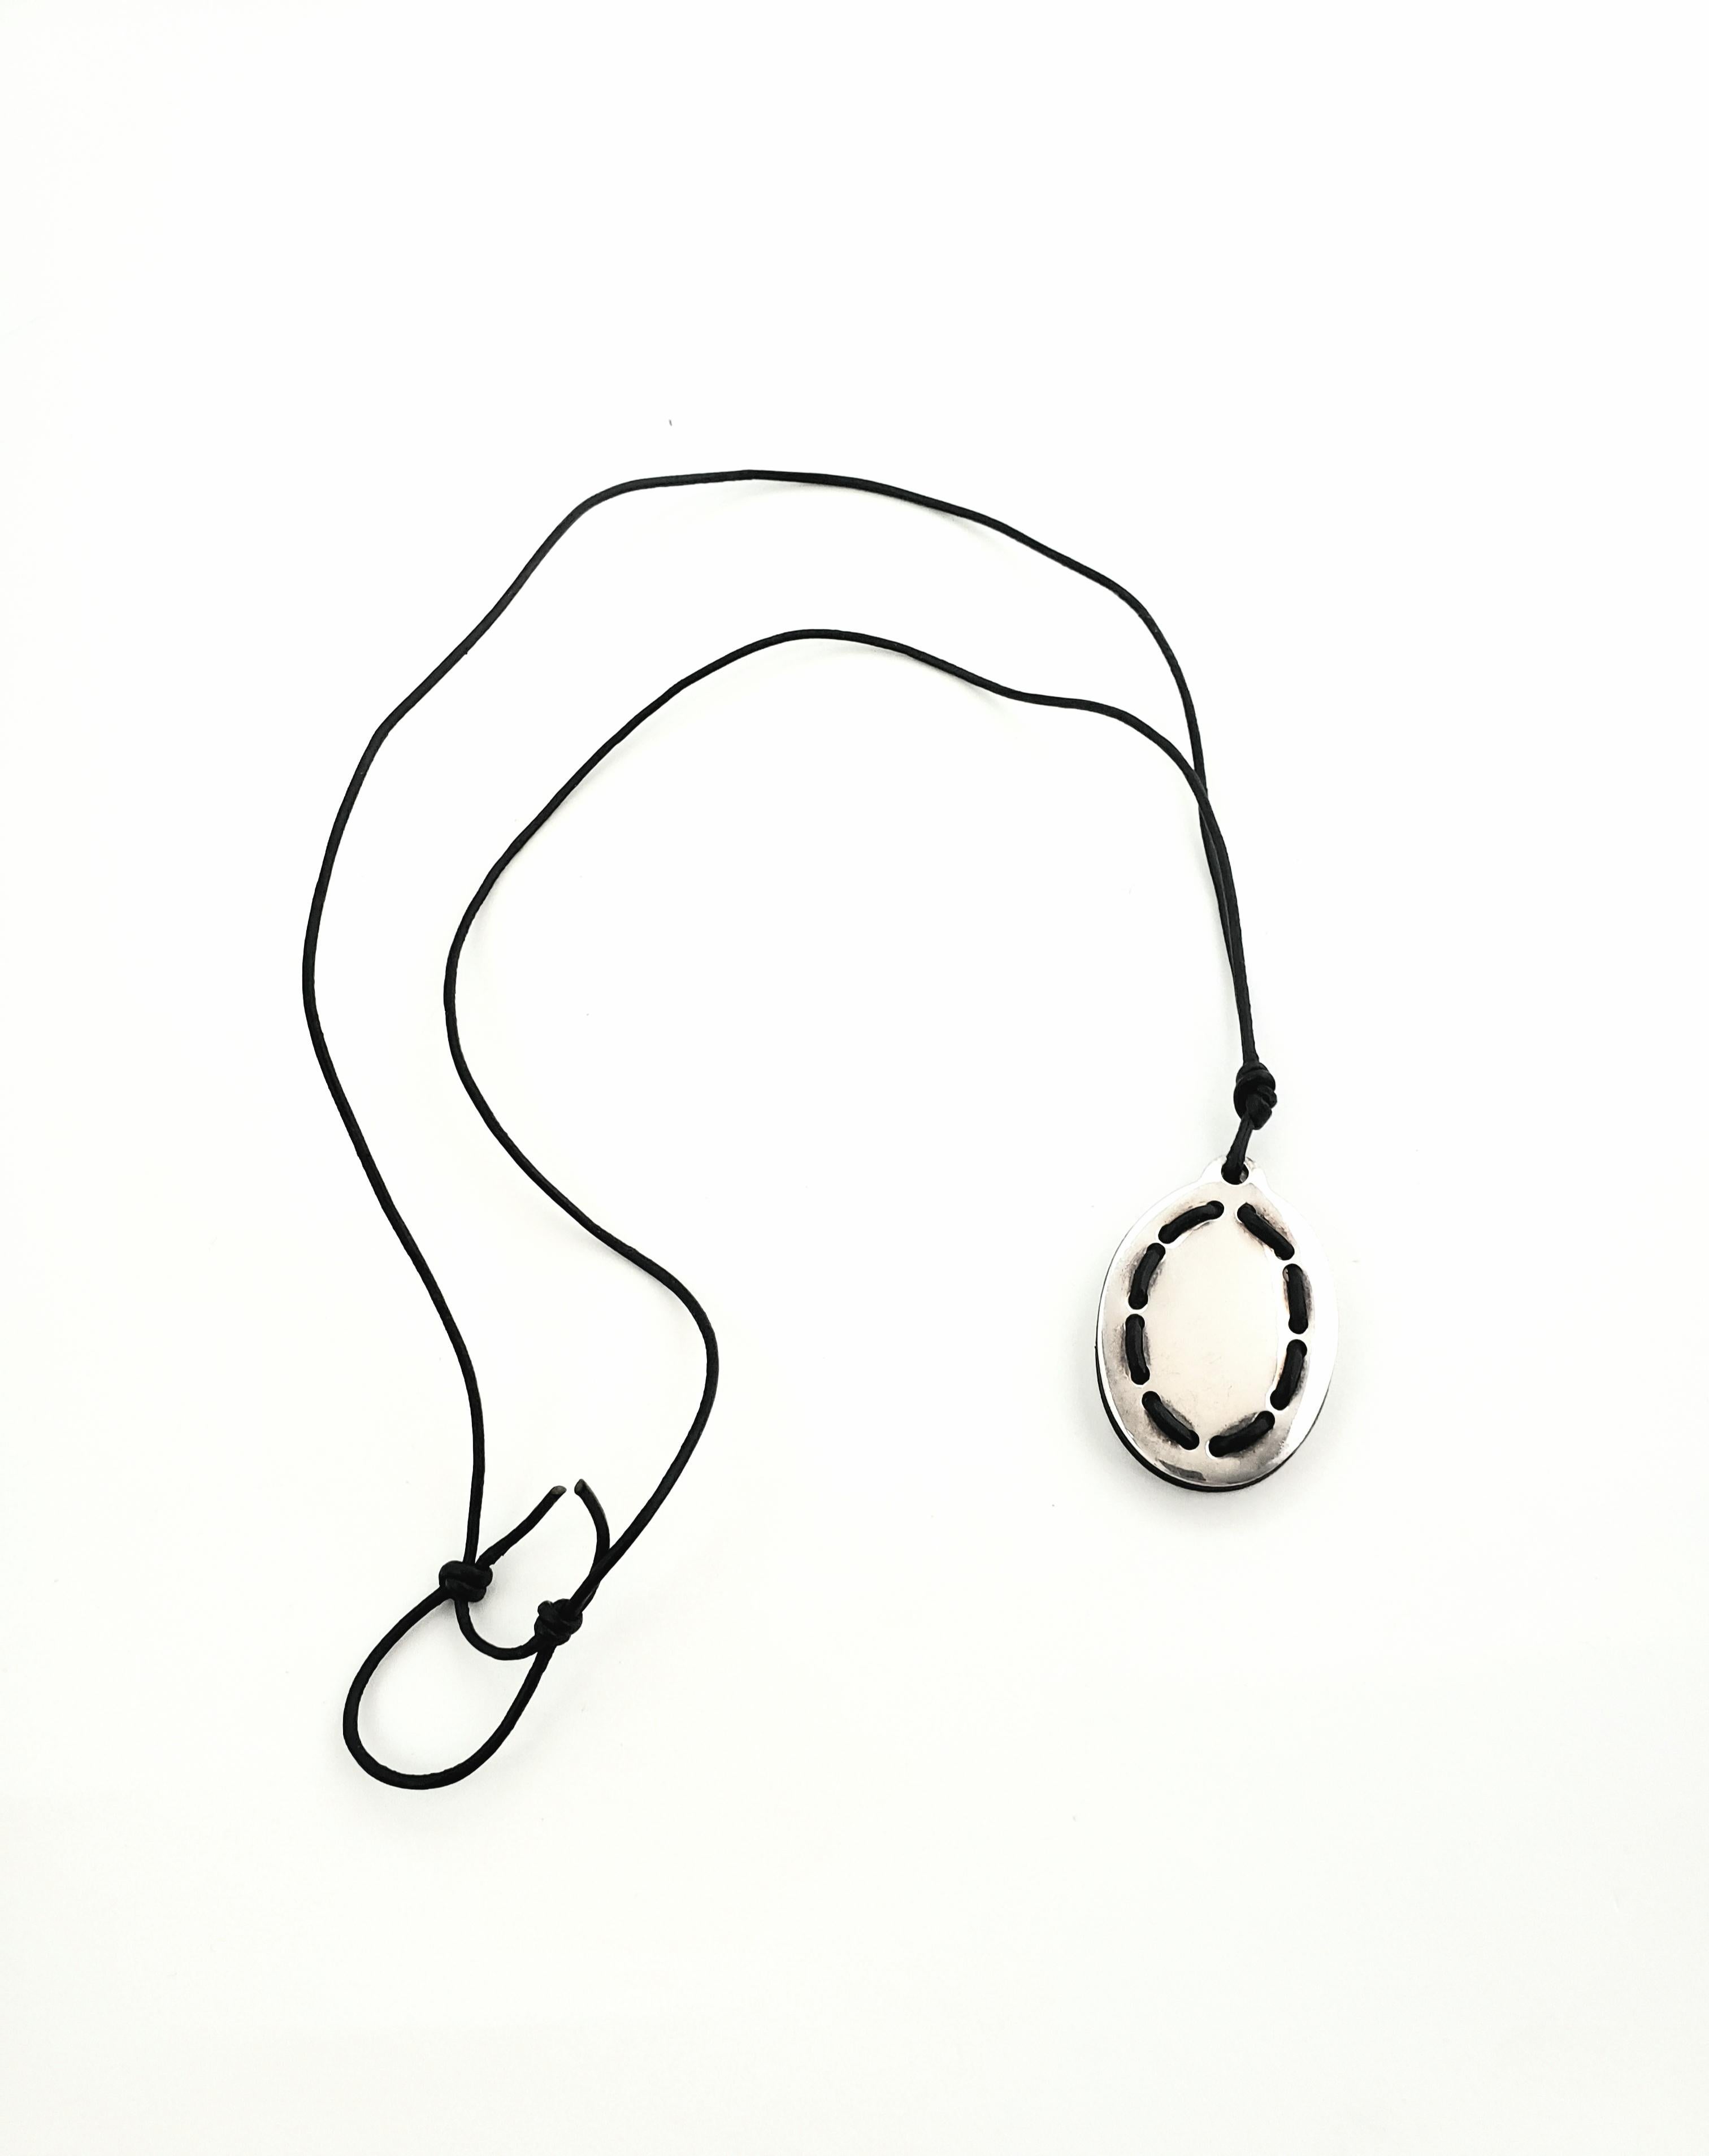 Ilario Casi Italy Sterling Silver Pendant with Black Cord Necklace

This is a lovely sterling silver pendant with a black cord necklace by Ilario Casi.

Measurements:     Black Cord Necklace measures approx 29 inches.  Pendant measures 1 and 3/4